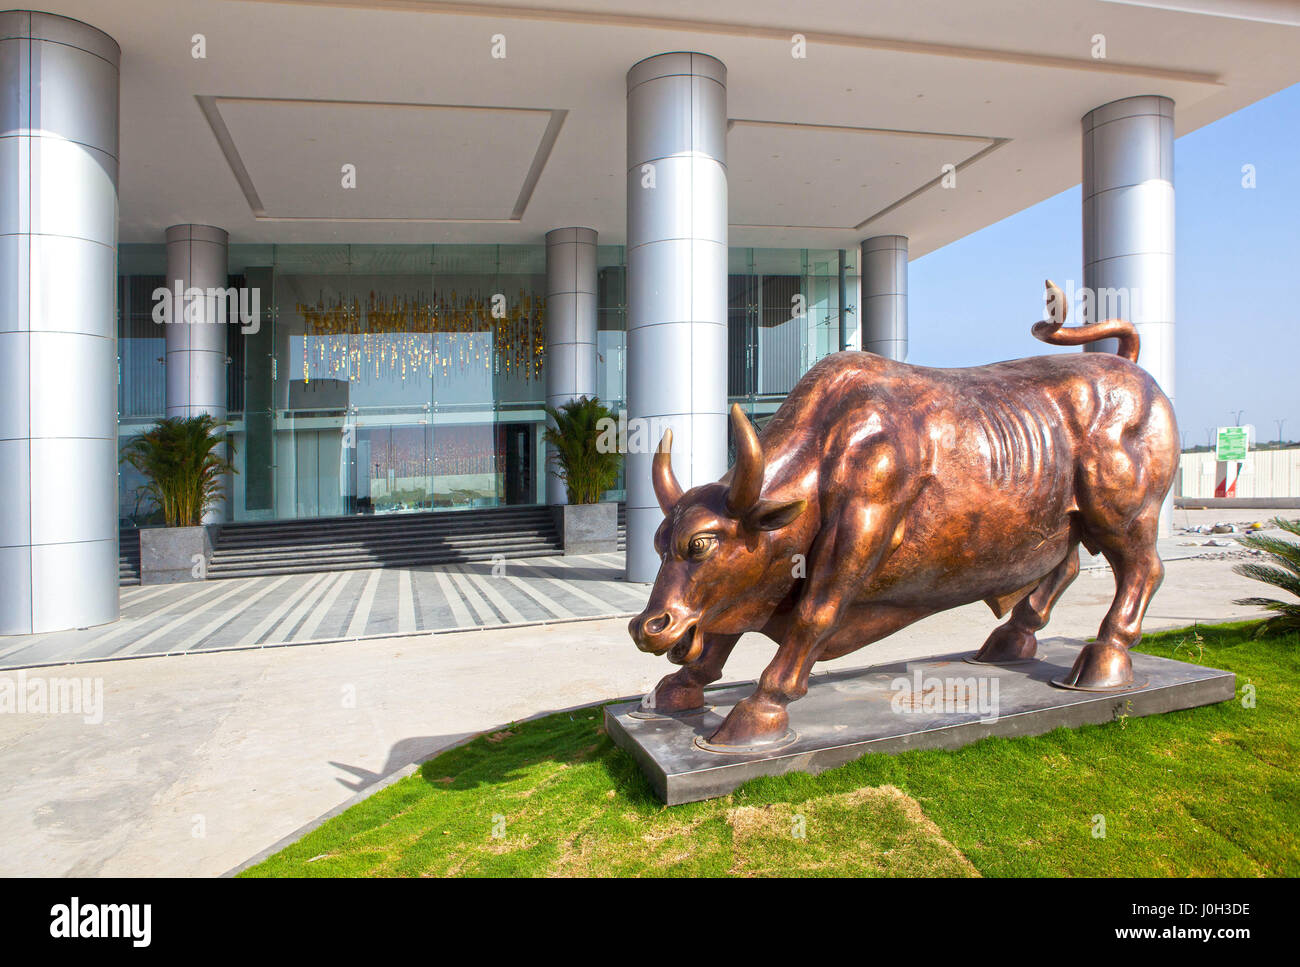 Gift City, Gujarat, India. 20th Mar, 2017. 20 March 2017 - GIFT city, India.A sculpture of the raging Bull at the GIFT city symbolizes India's Bull run and growth as a major International Economic Power. Credit: Subhash Sharma/ZUMA Wire/Alamy Live News Stock Photo